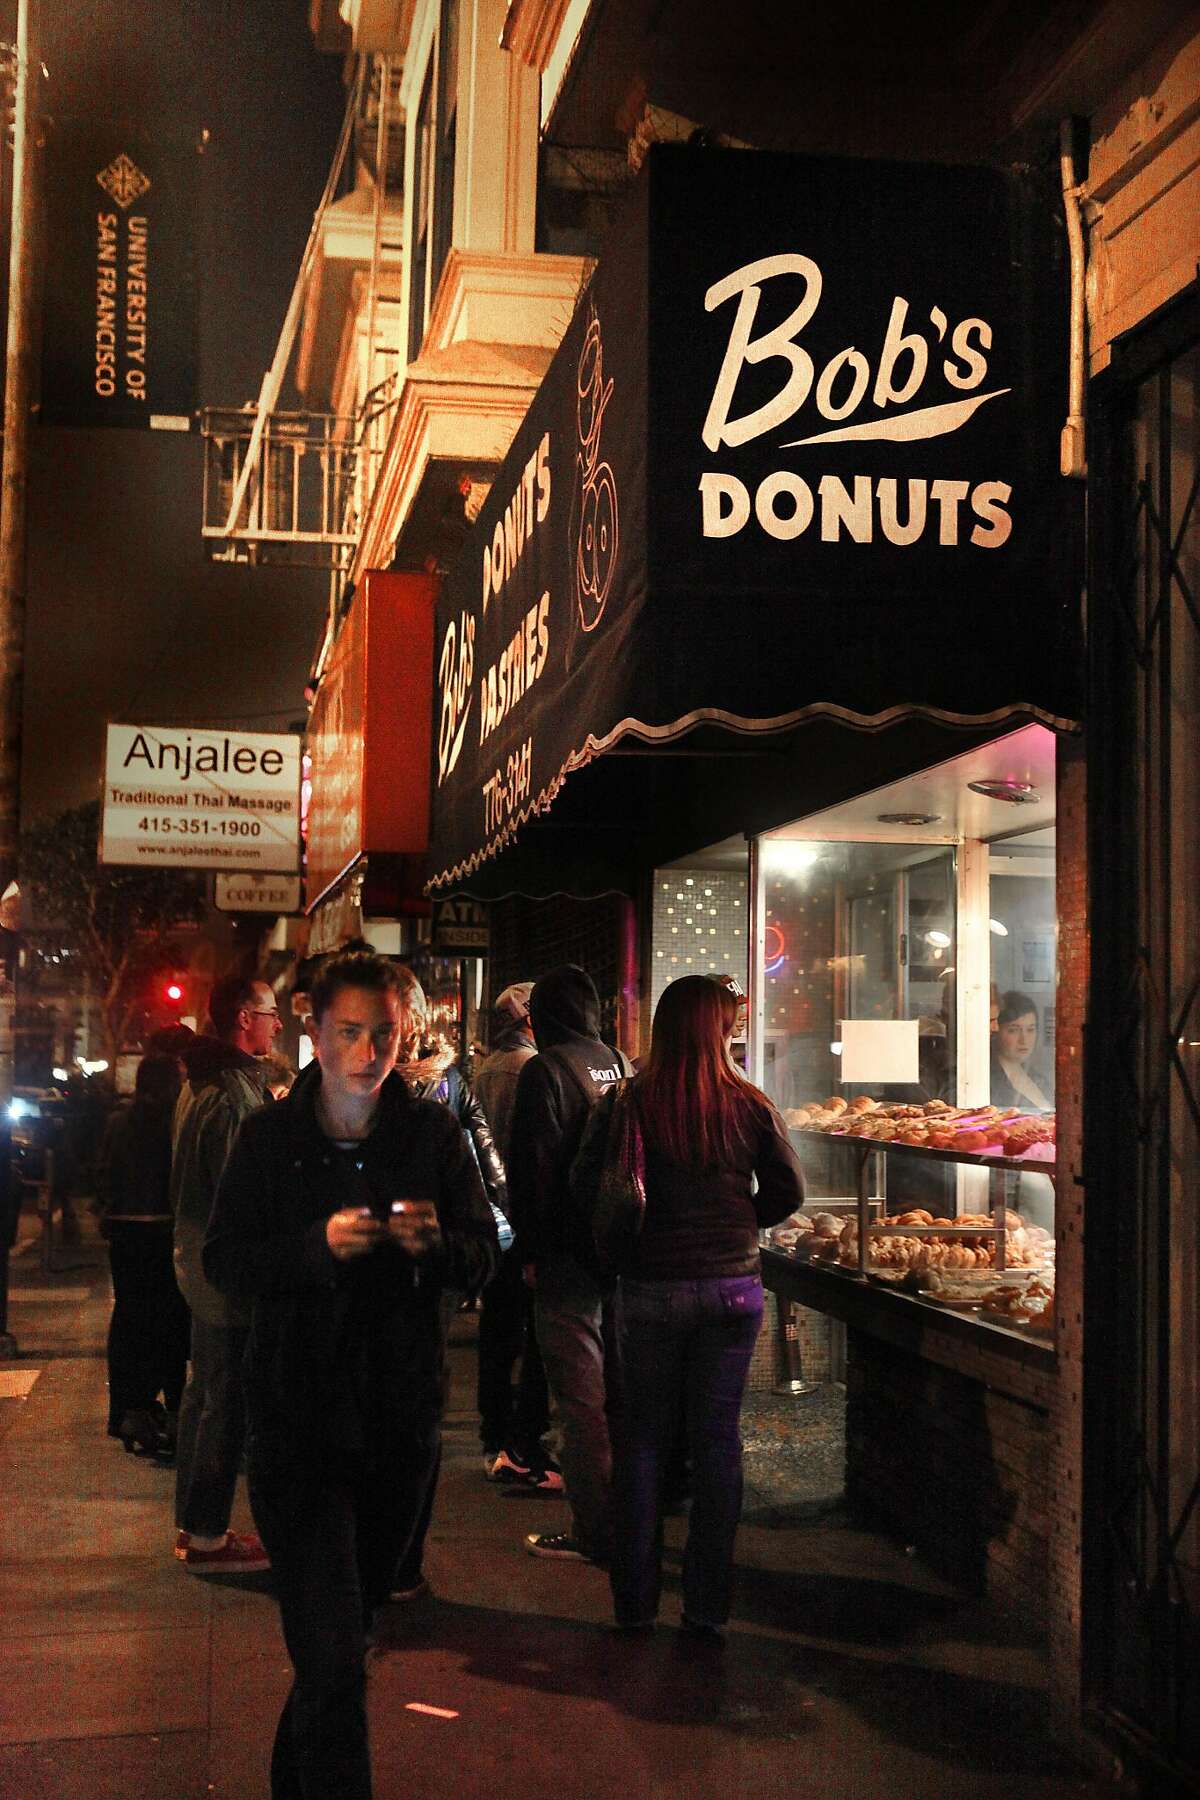 After hour patrons line up outside of Bob's Donuts on Polk St. in San Francisco, Calif., on Friday, February 22, 2013.